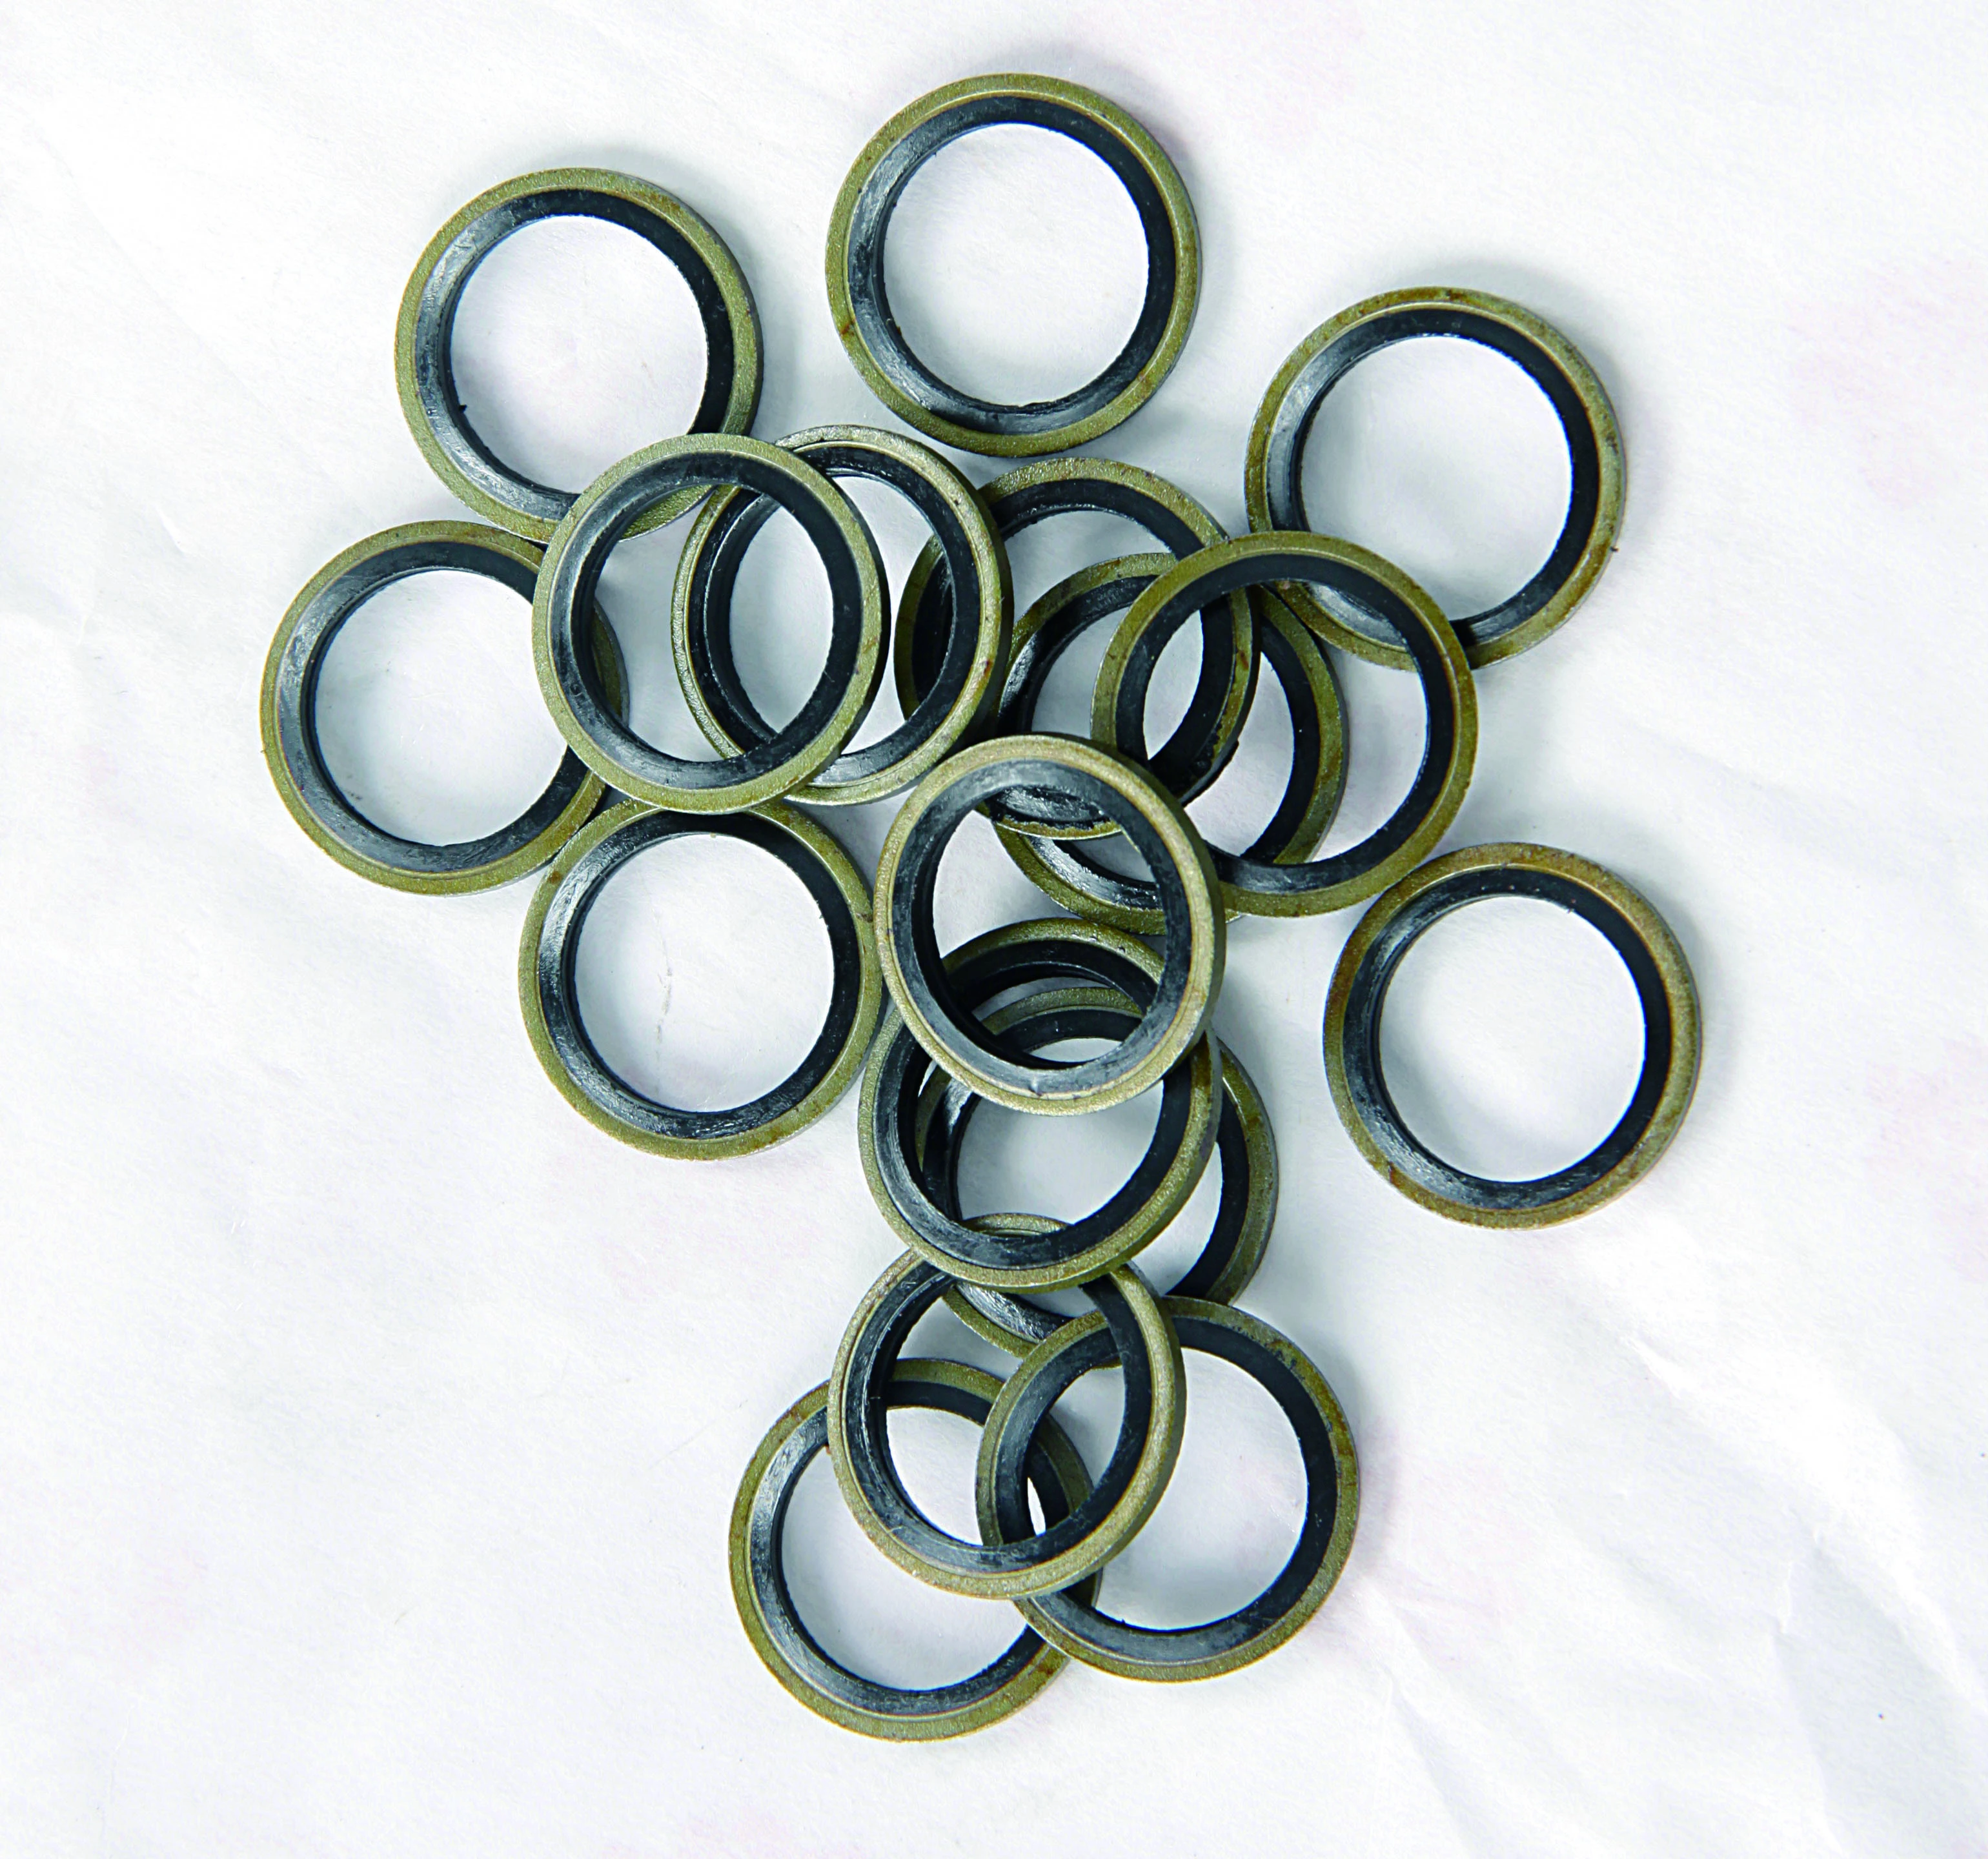 Rubber hydraulic bonded copper washers seal